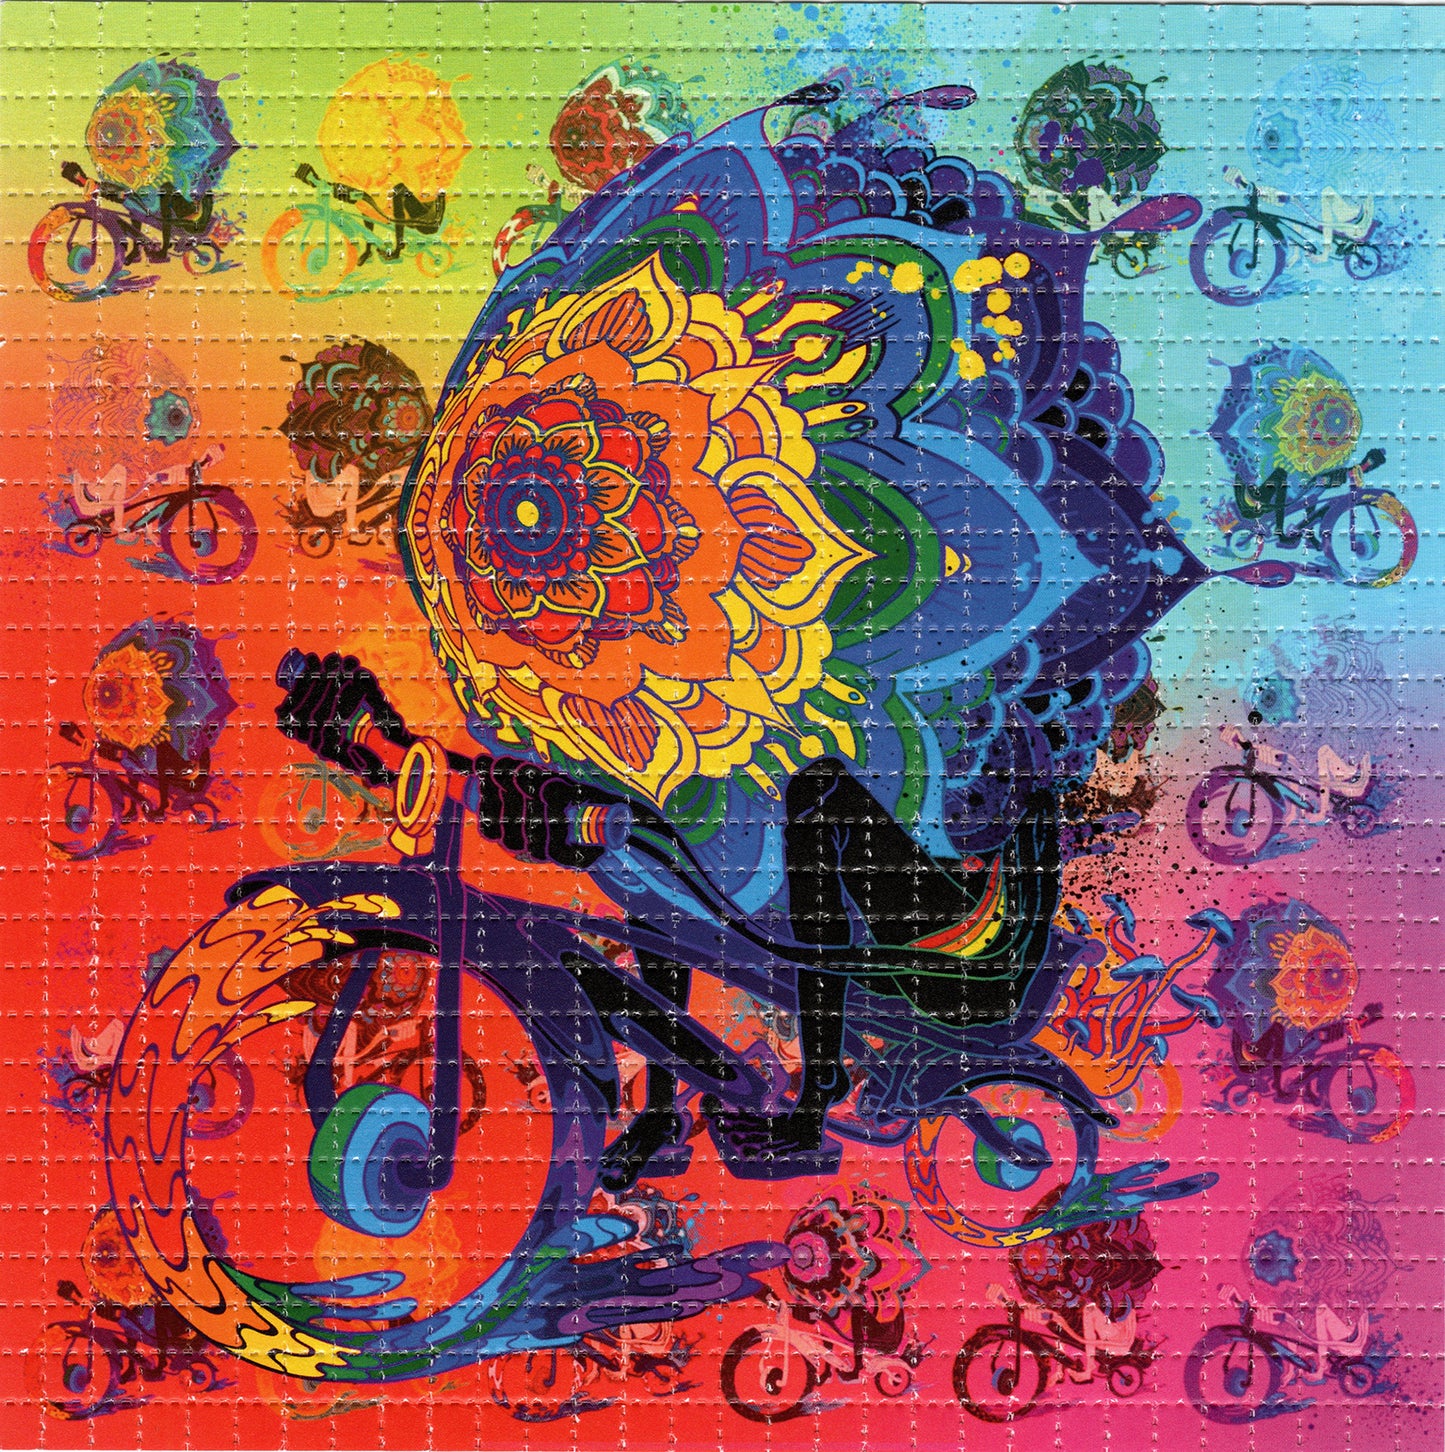 Captain Trips Trip by Lex Newtho Signed Limited Edition LSD blotter art print